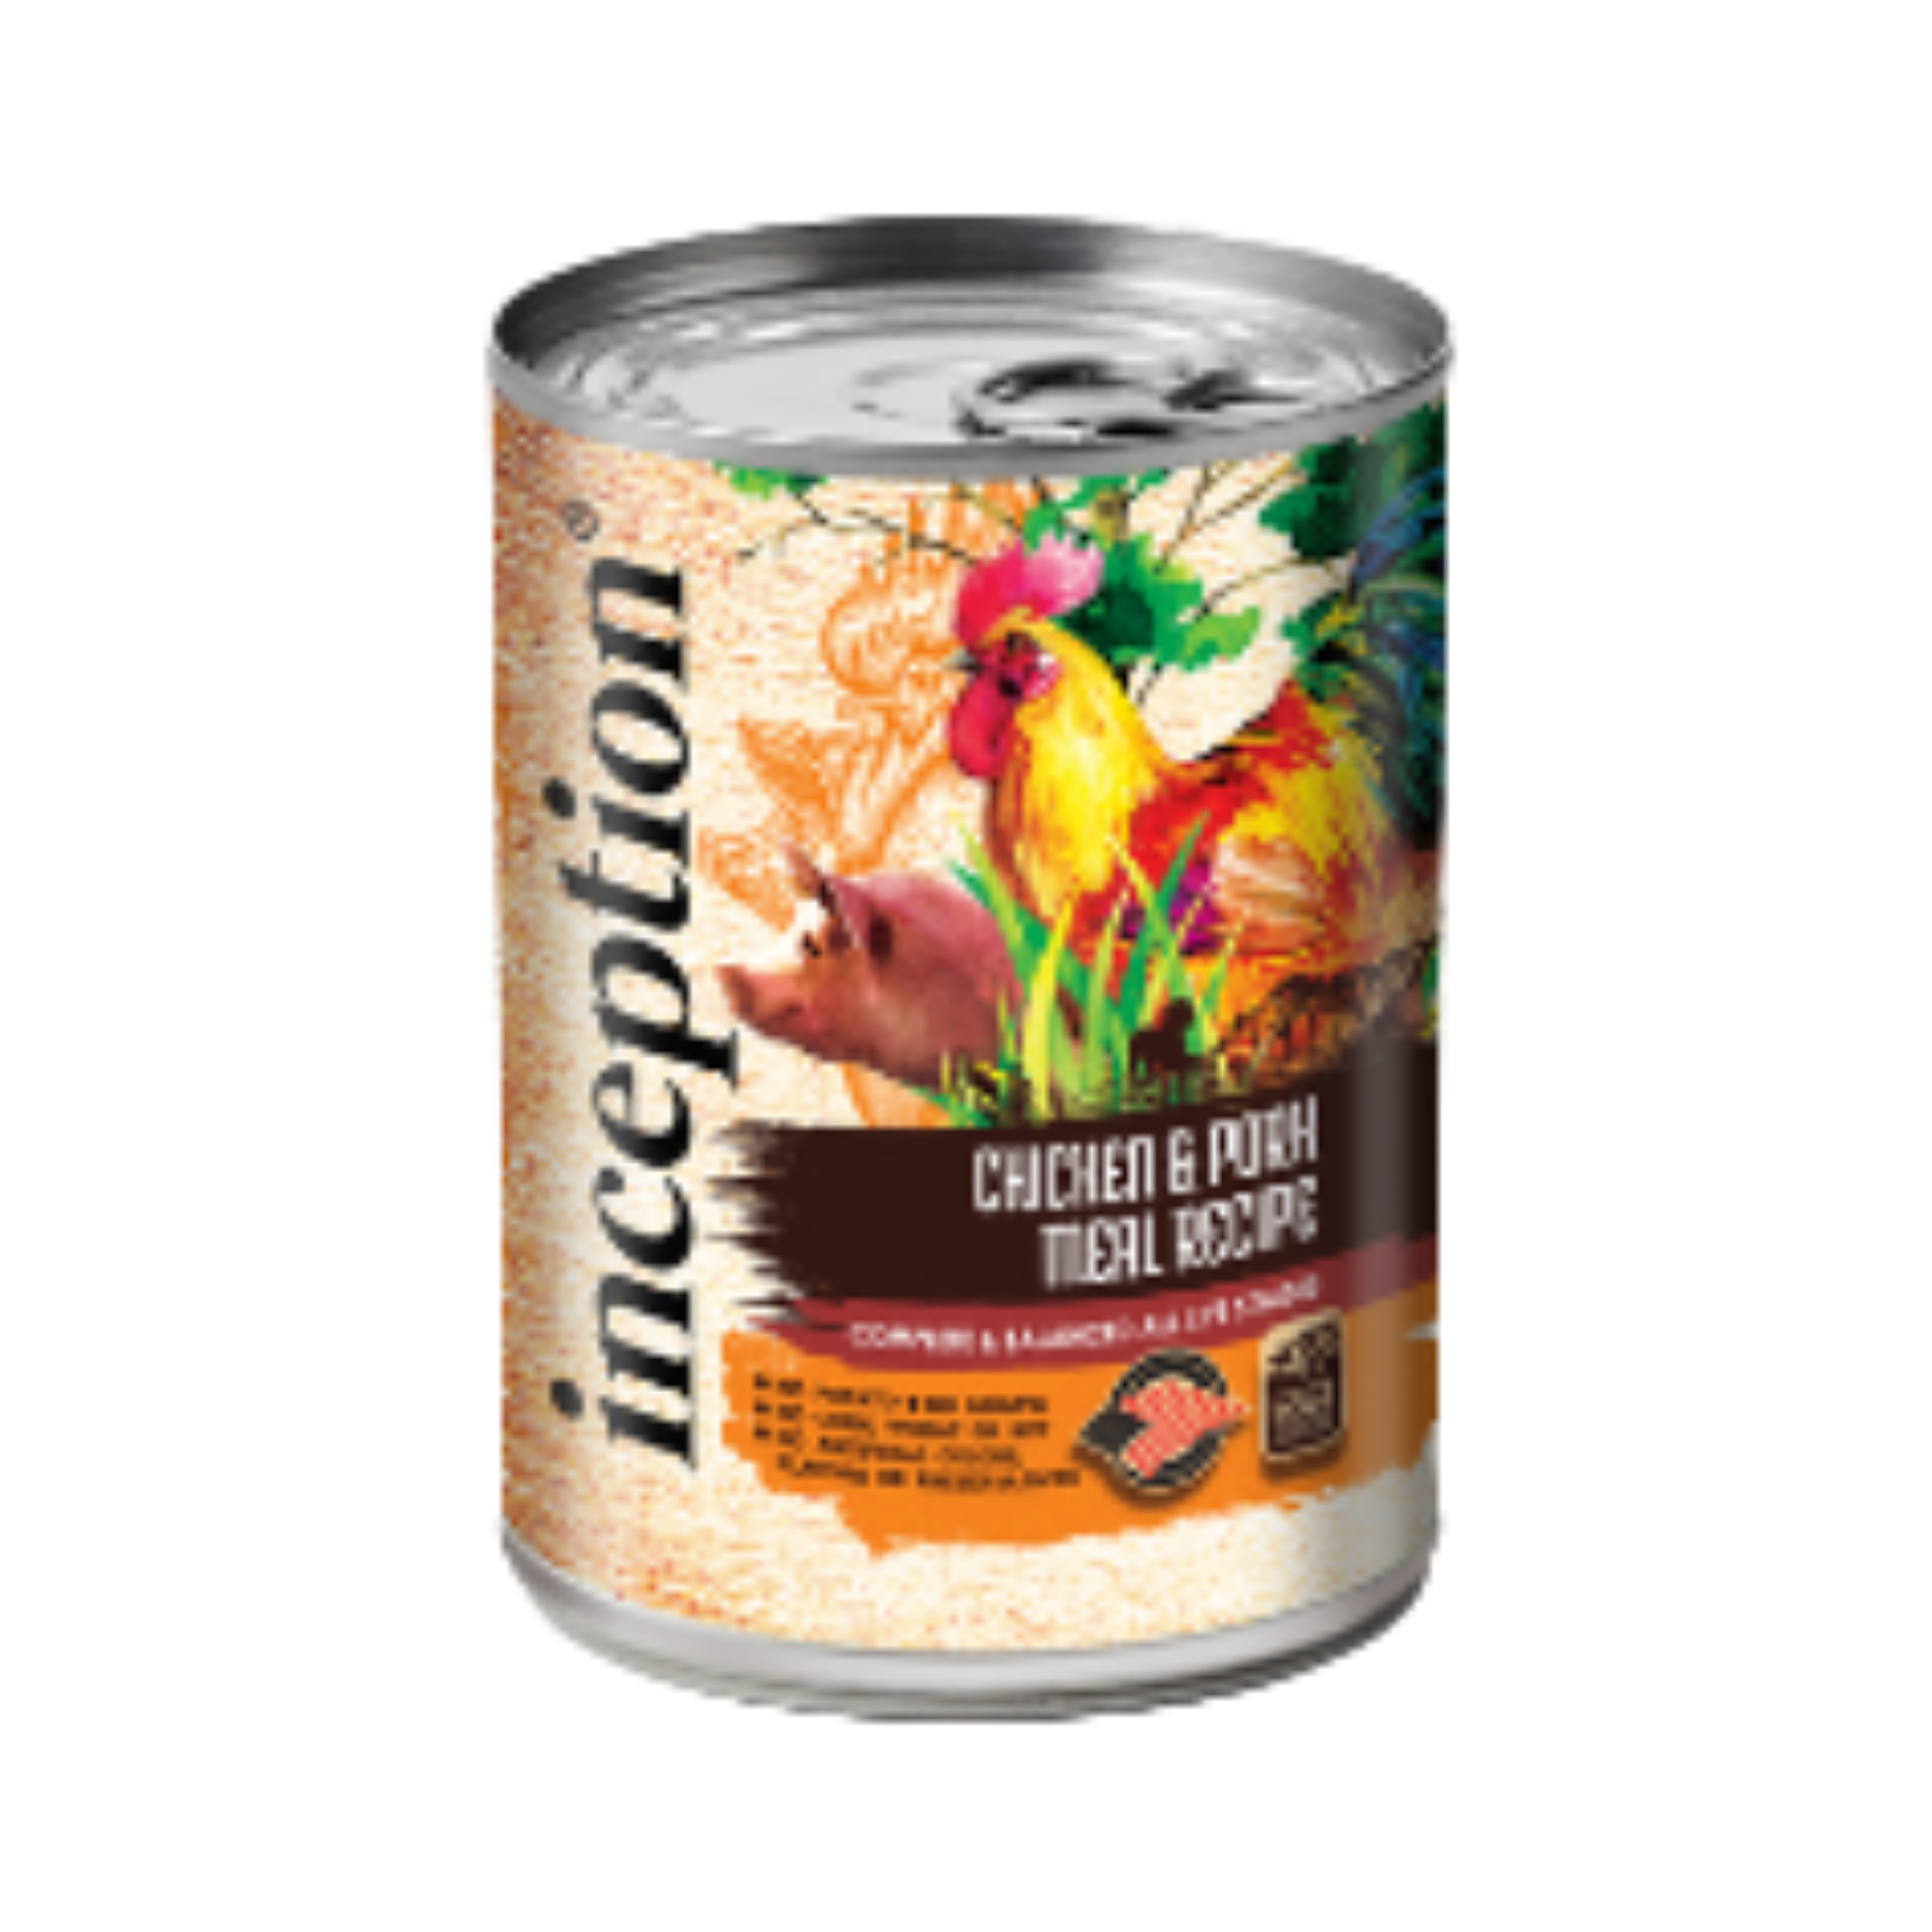 Inception Chicken & Pork Recipe Canned Dog Food 13oz - Mutts & Co.